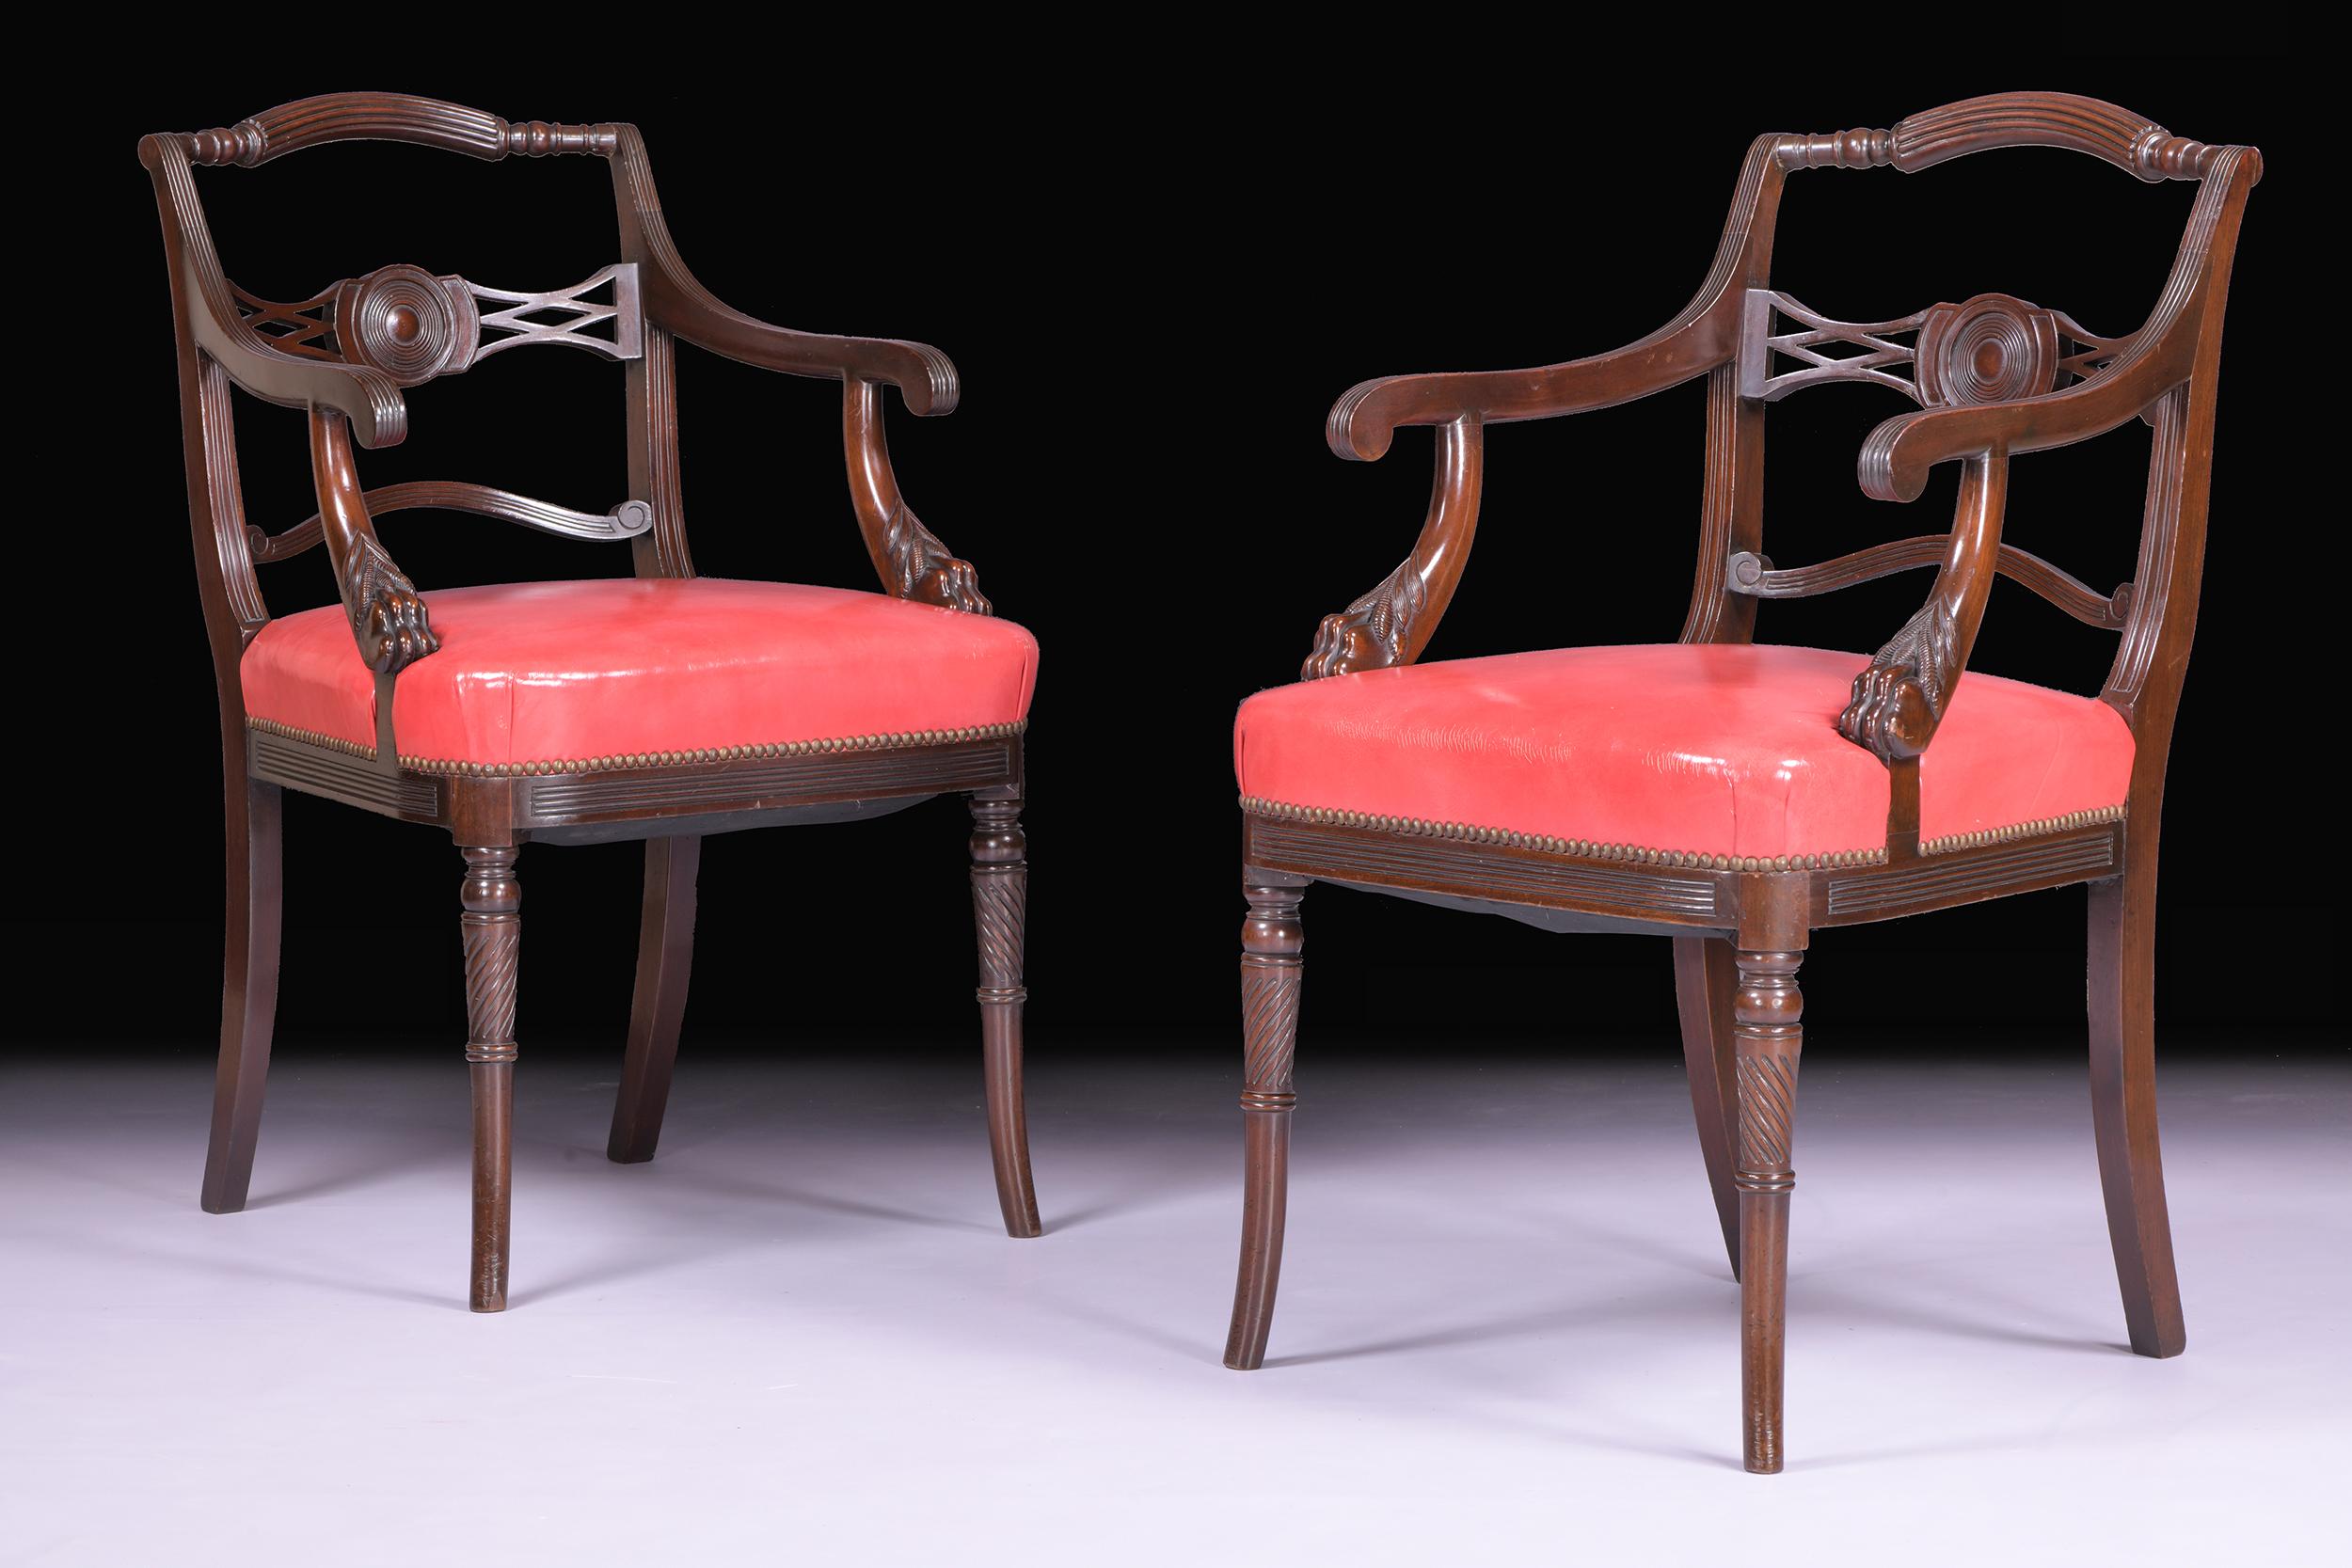 Pair of Early 19th Century Irish Regency Armchairs by Mack Williams & Gibton In Excellent Condition For Sale In Dublin, IE